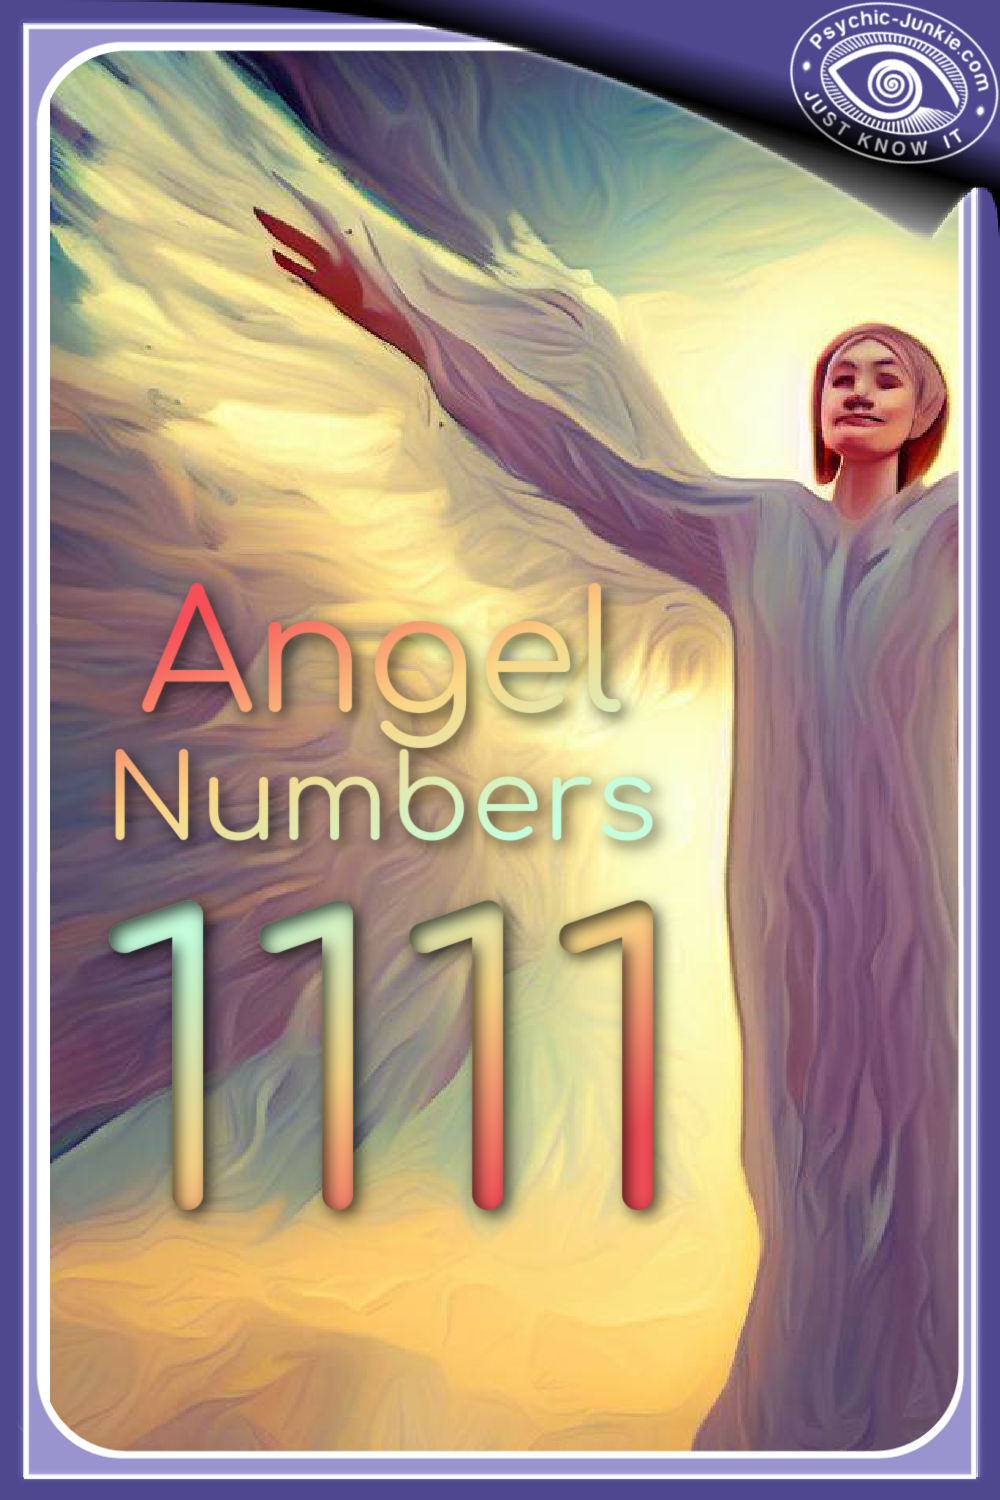 The 1111 Angel Number Meanings